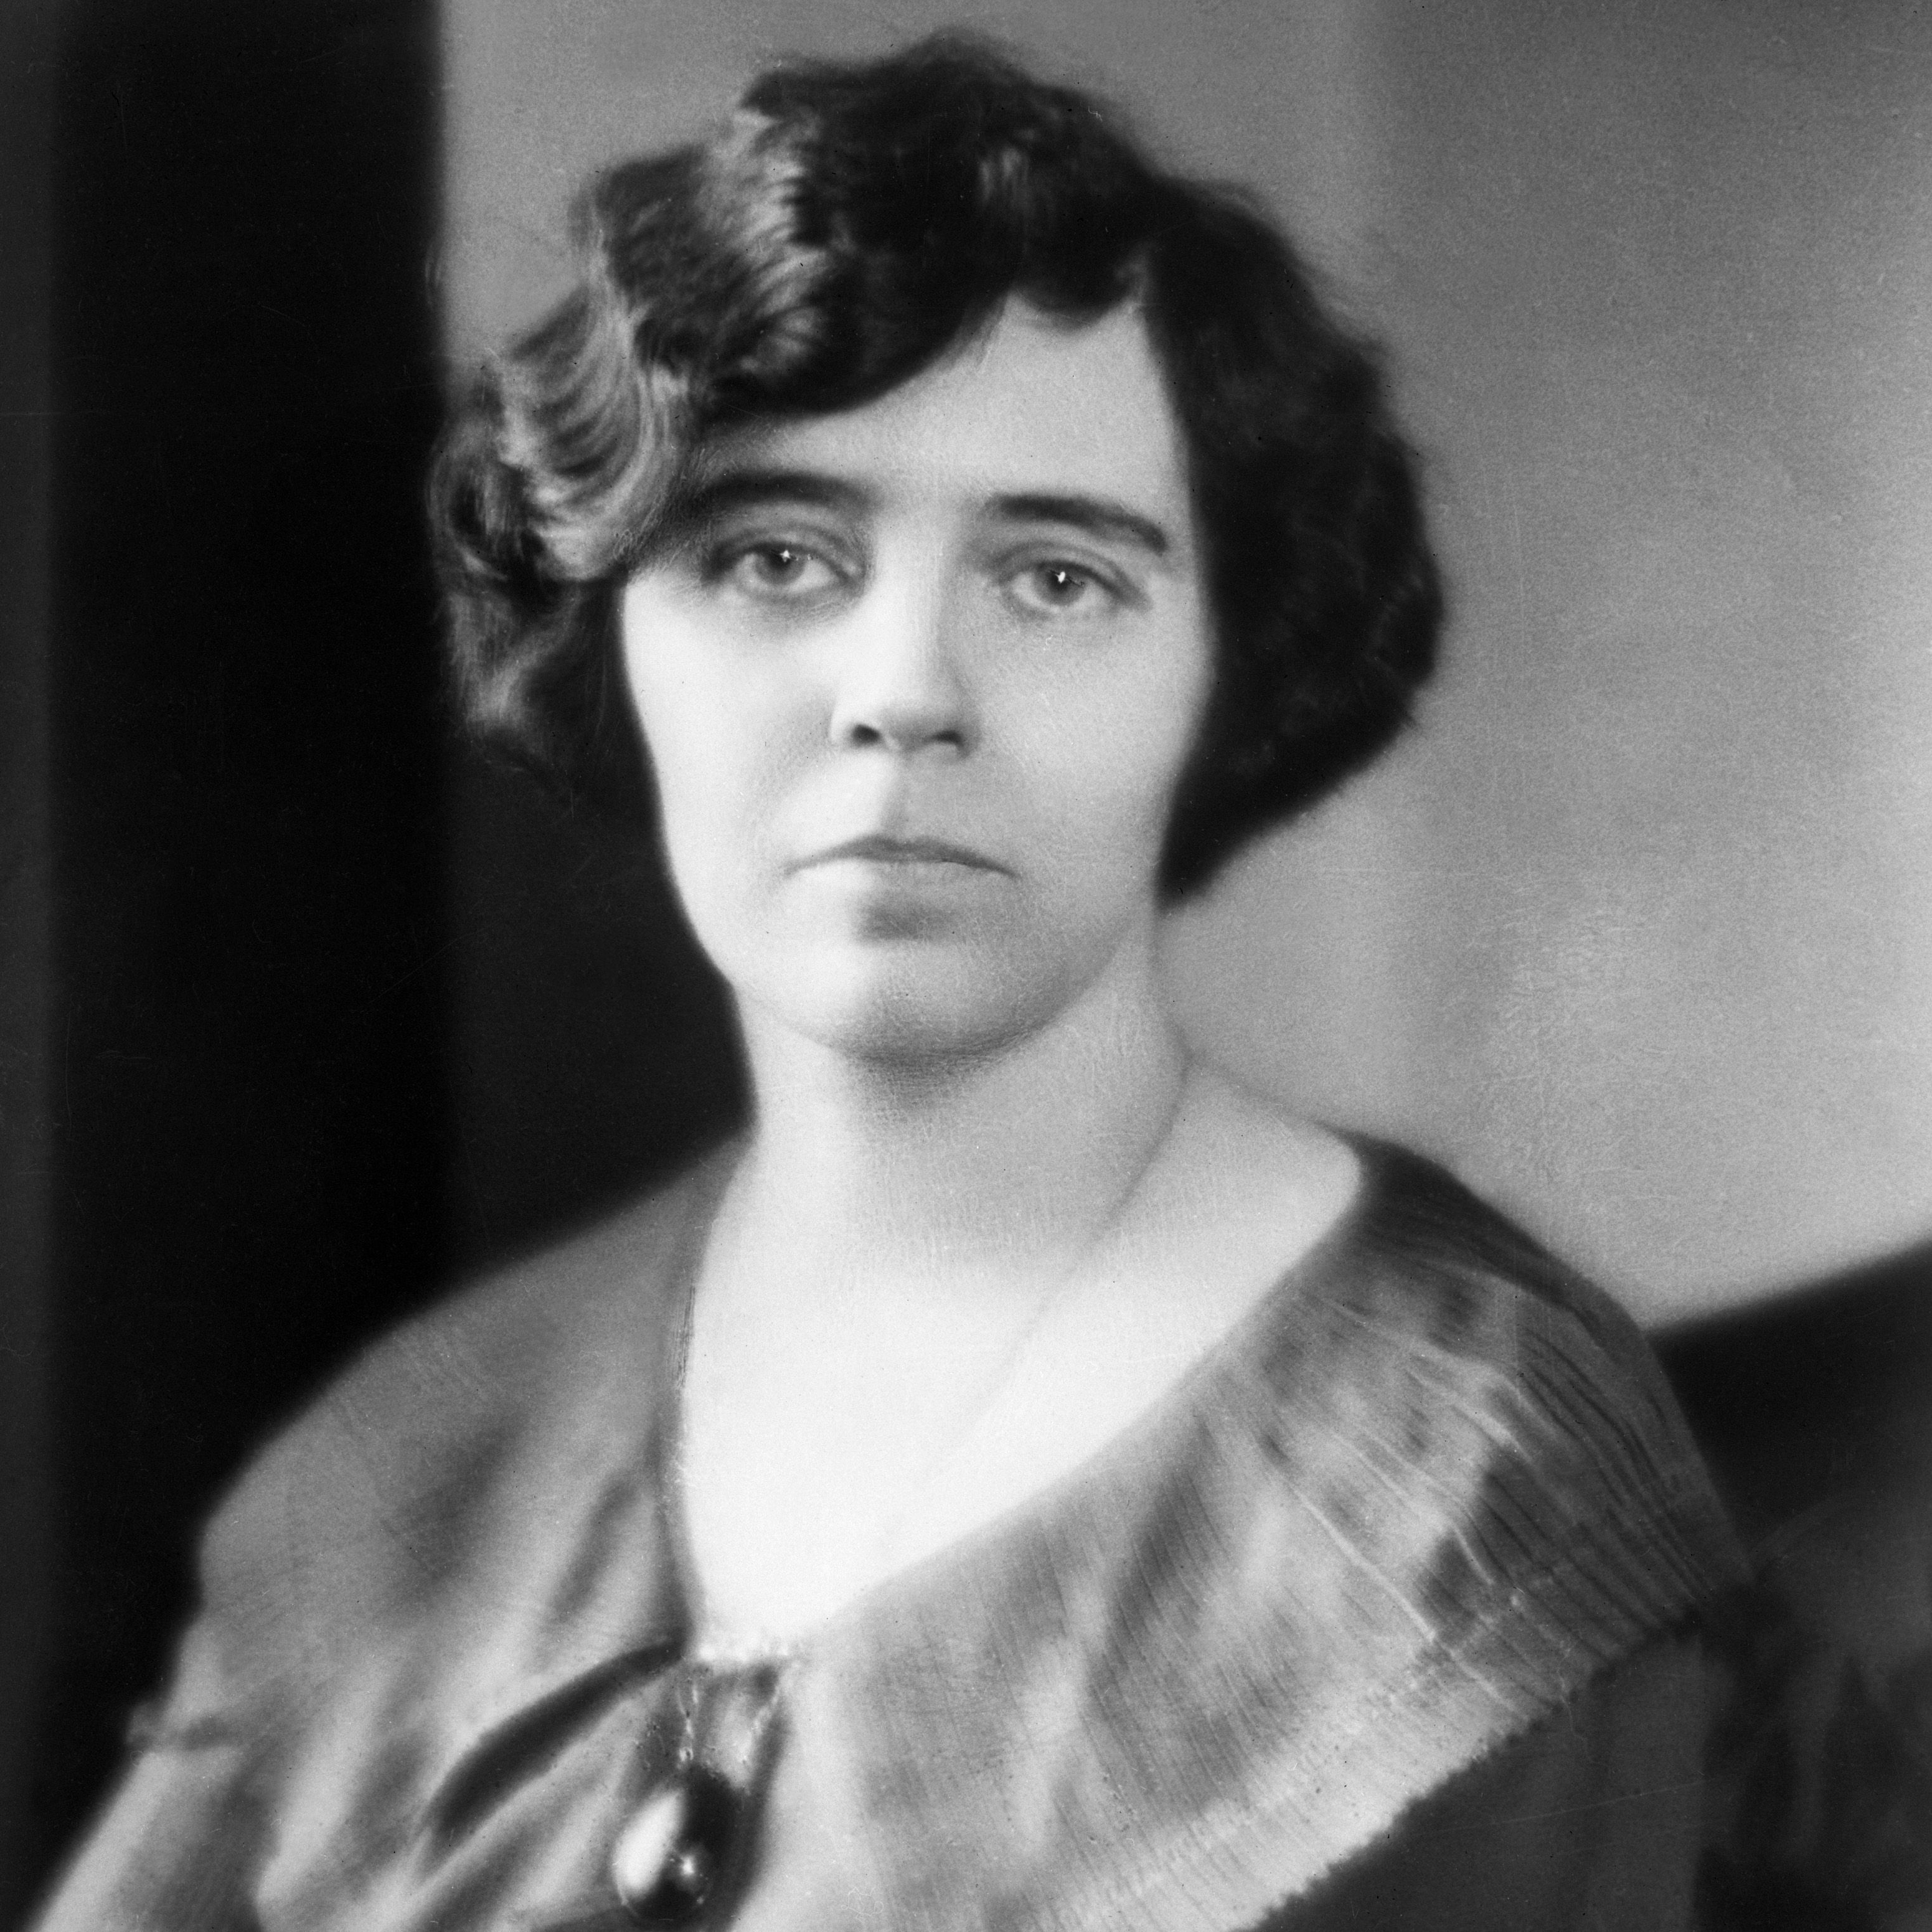 How 'The Unsinkable Molly Brown' Became A Titanic Hero